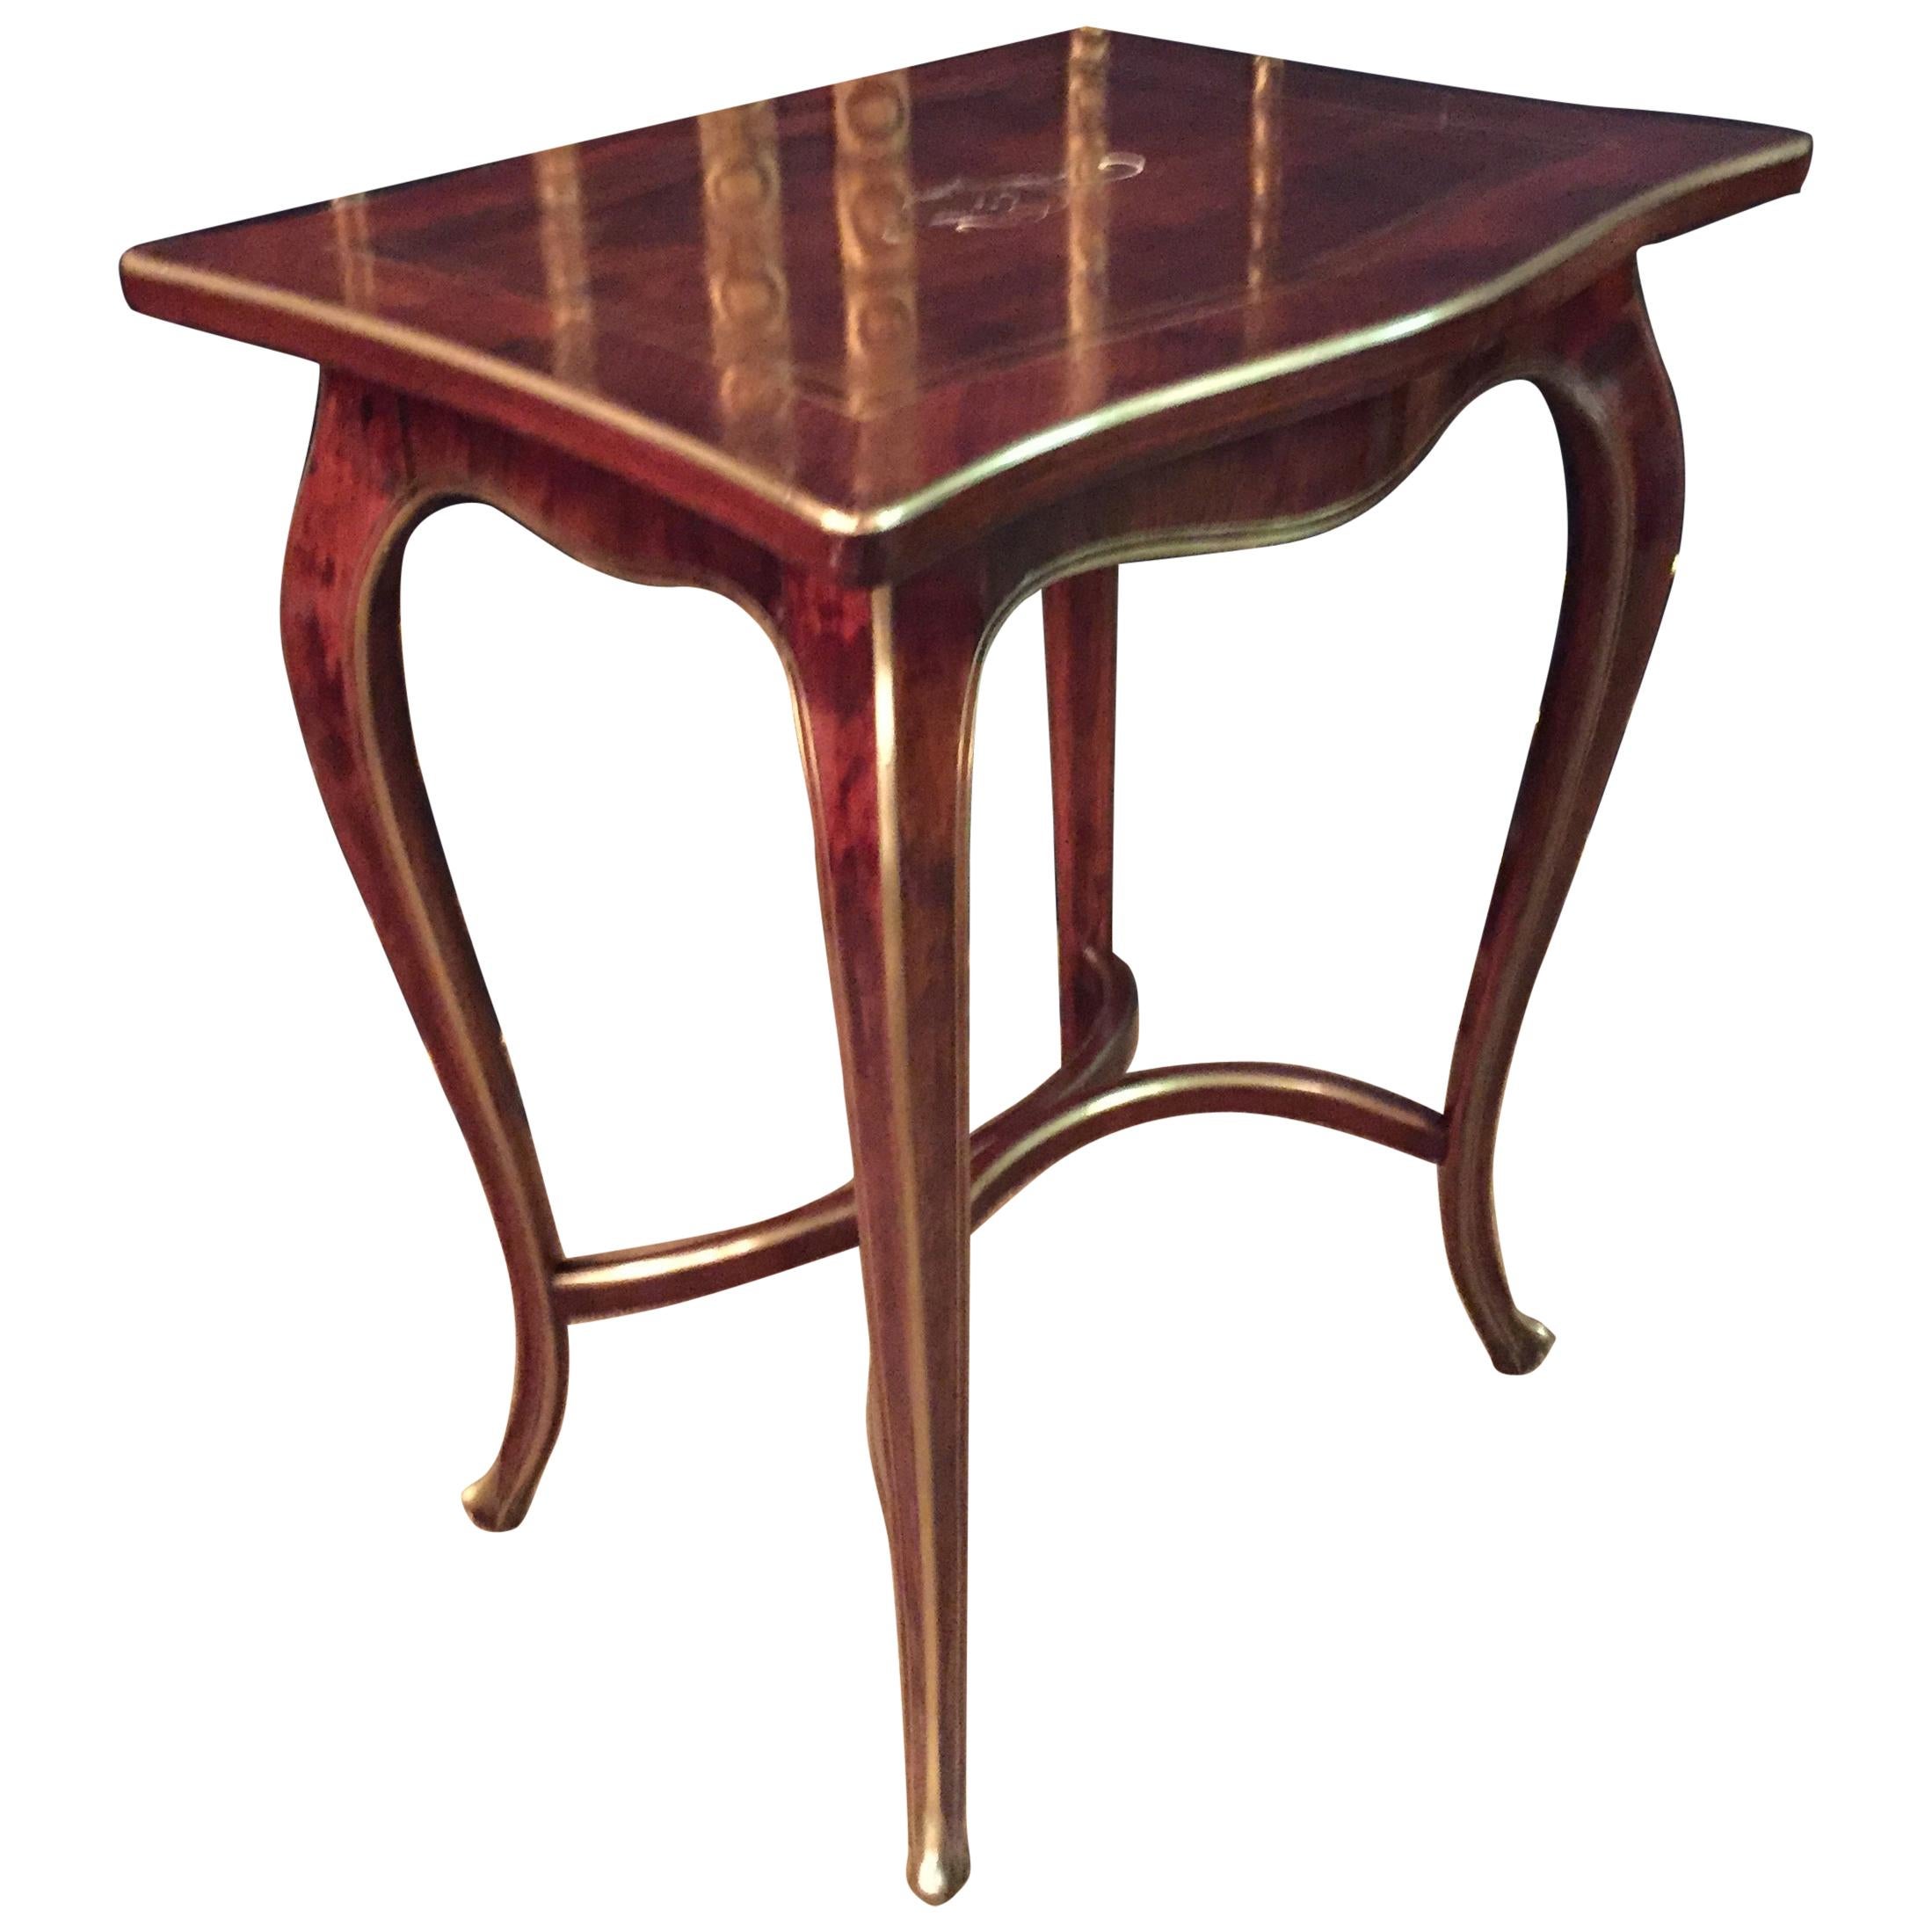 Antique Biedermeier Table Mahogany Inlaid with Mother Pearl 1870